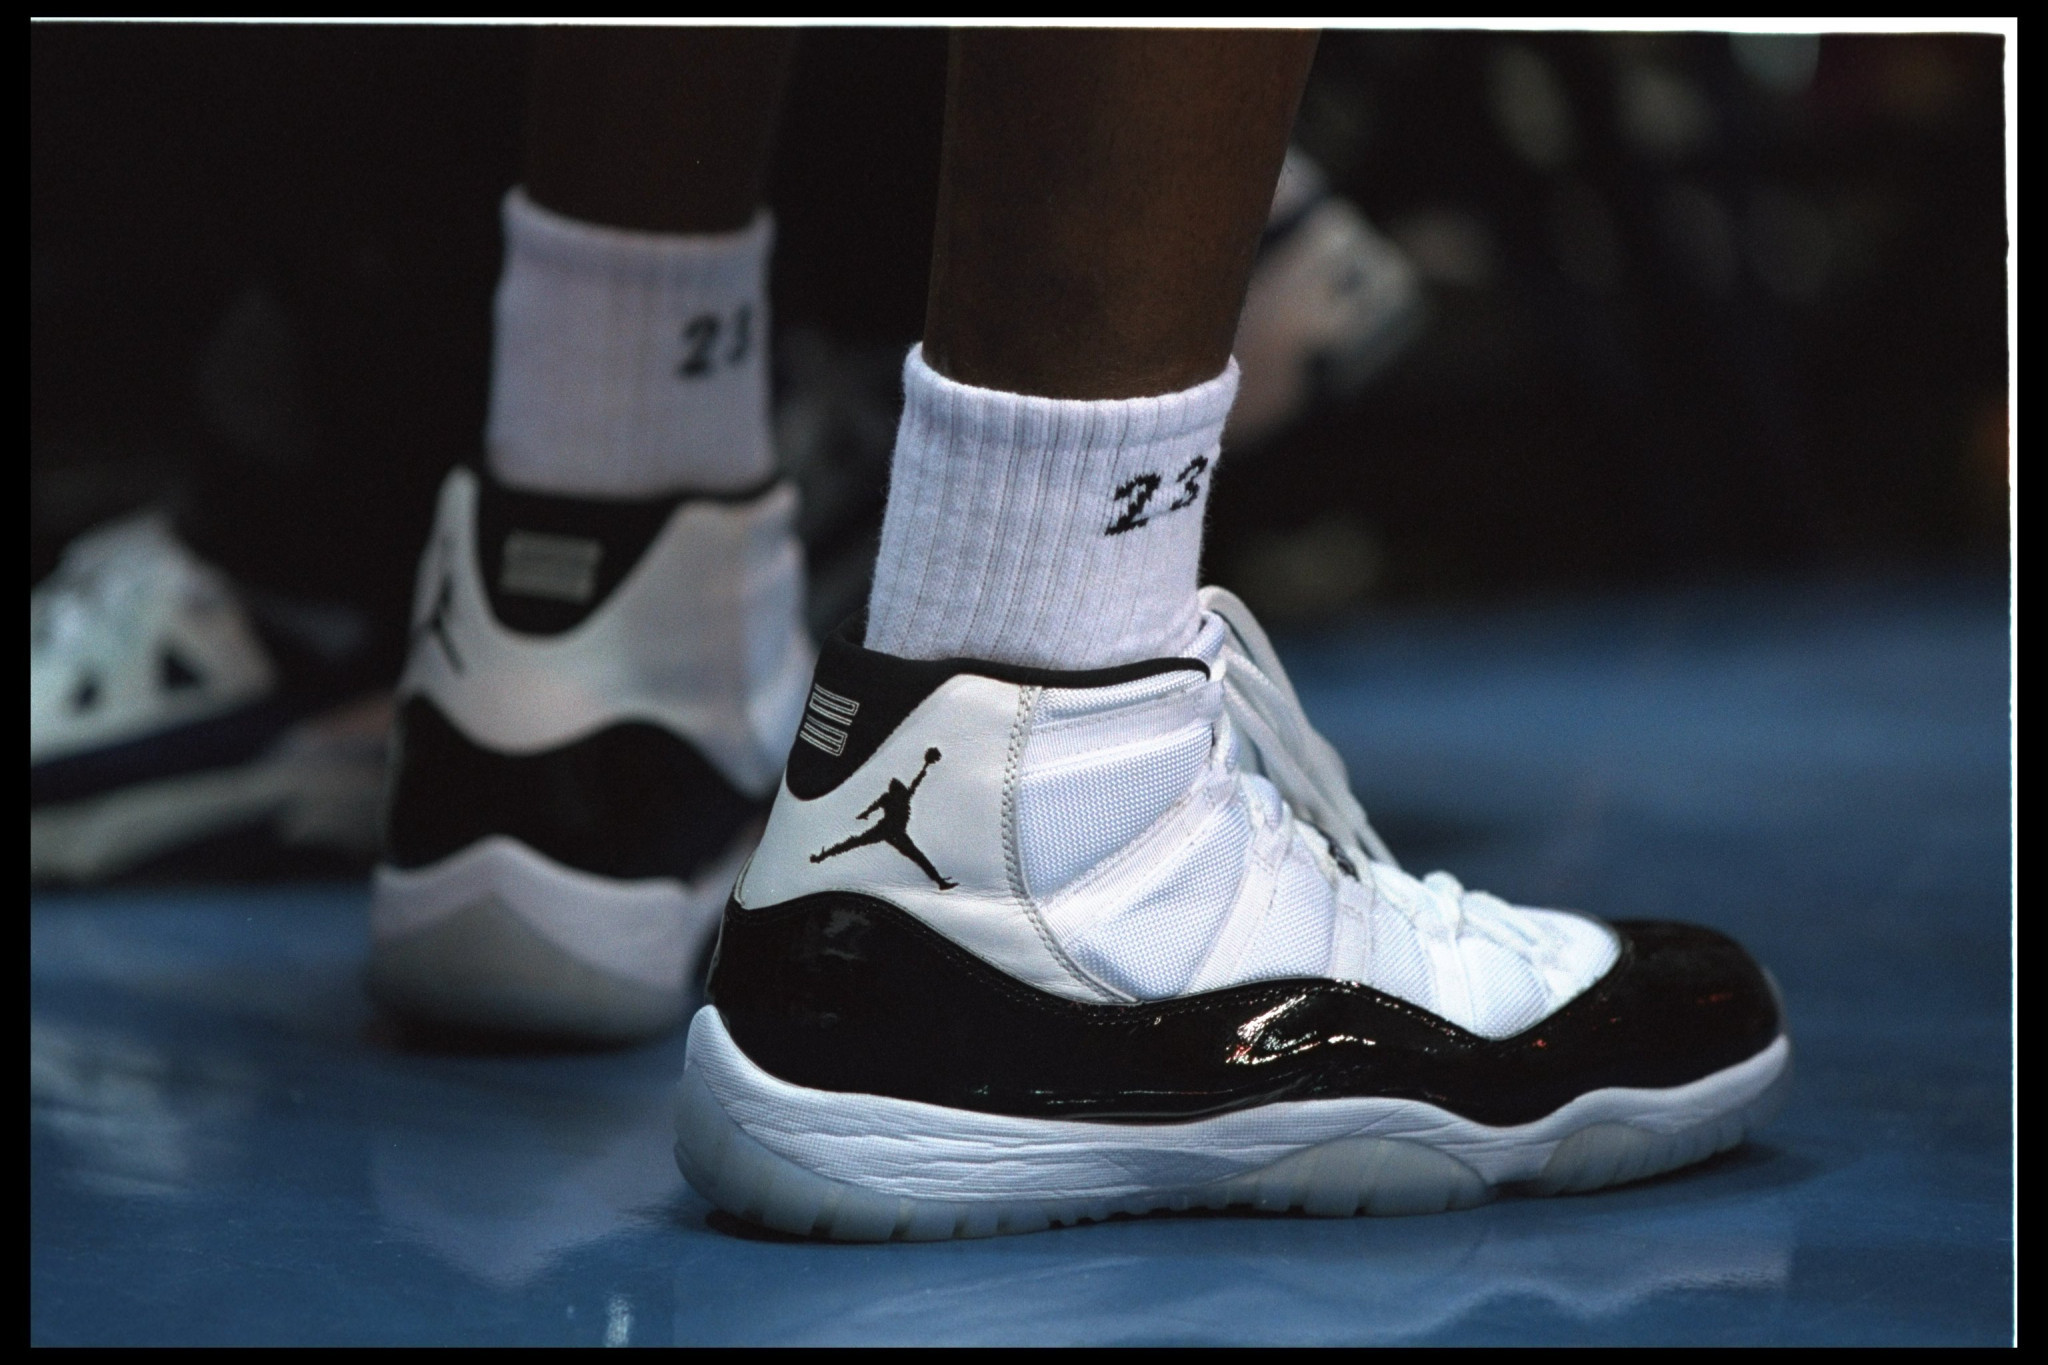 Rare collection of sneakers worn by NBA legend Jordan sold